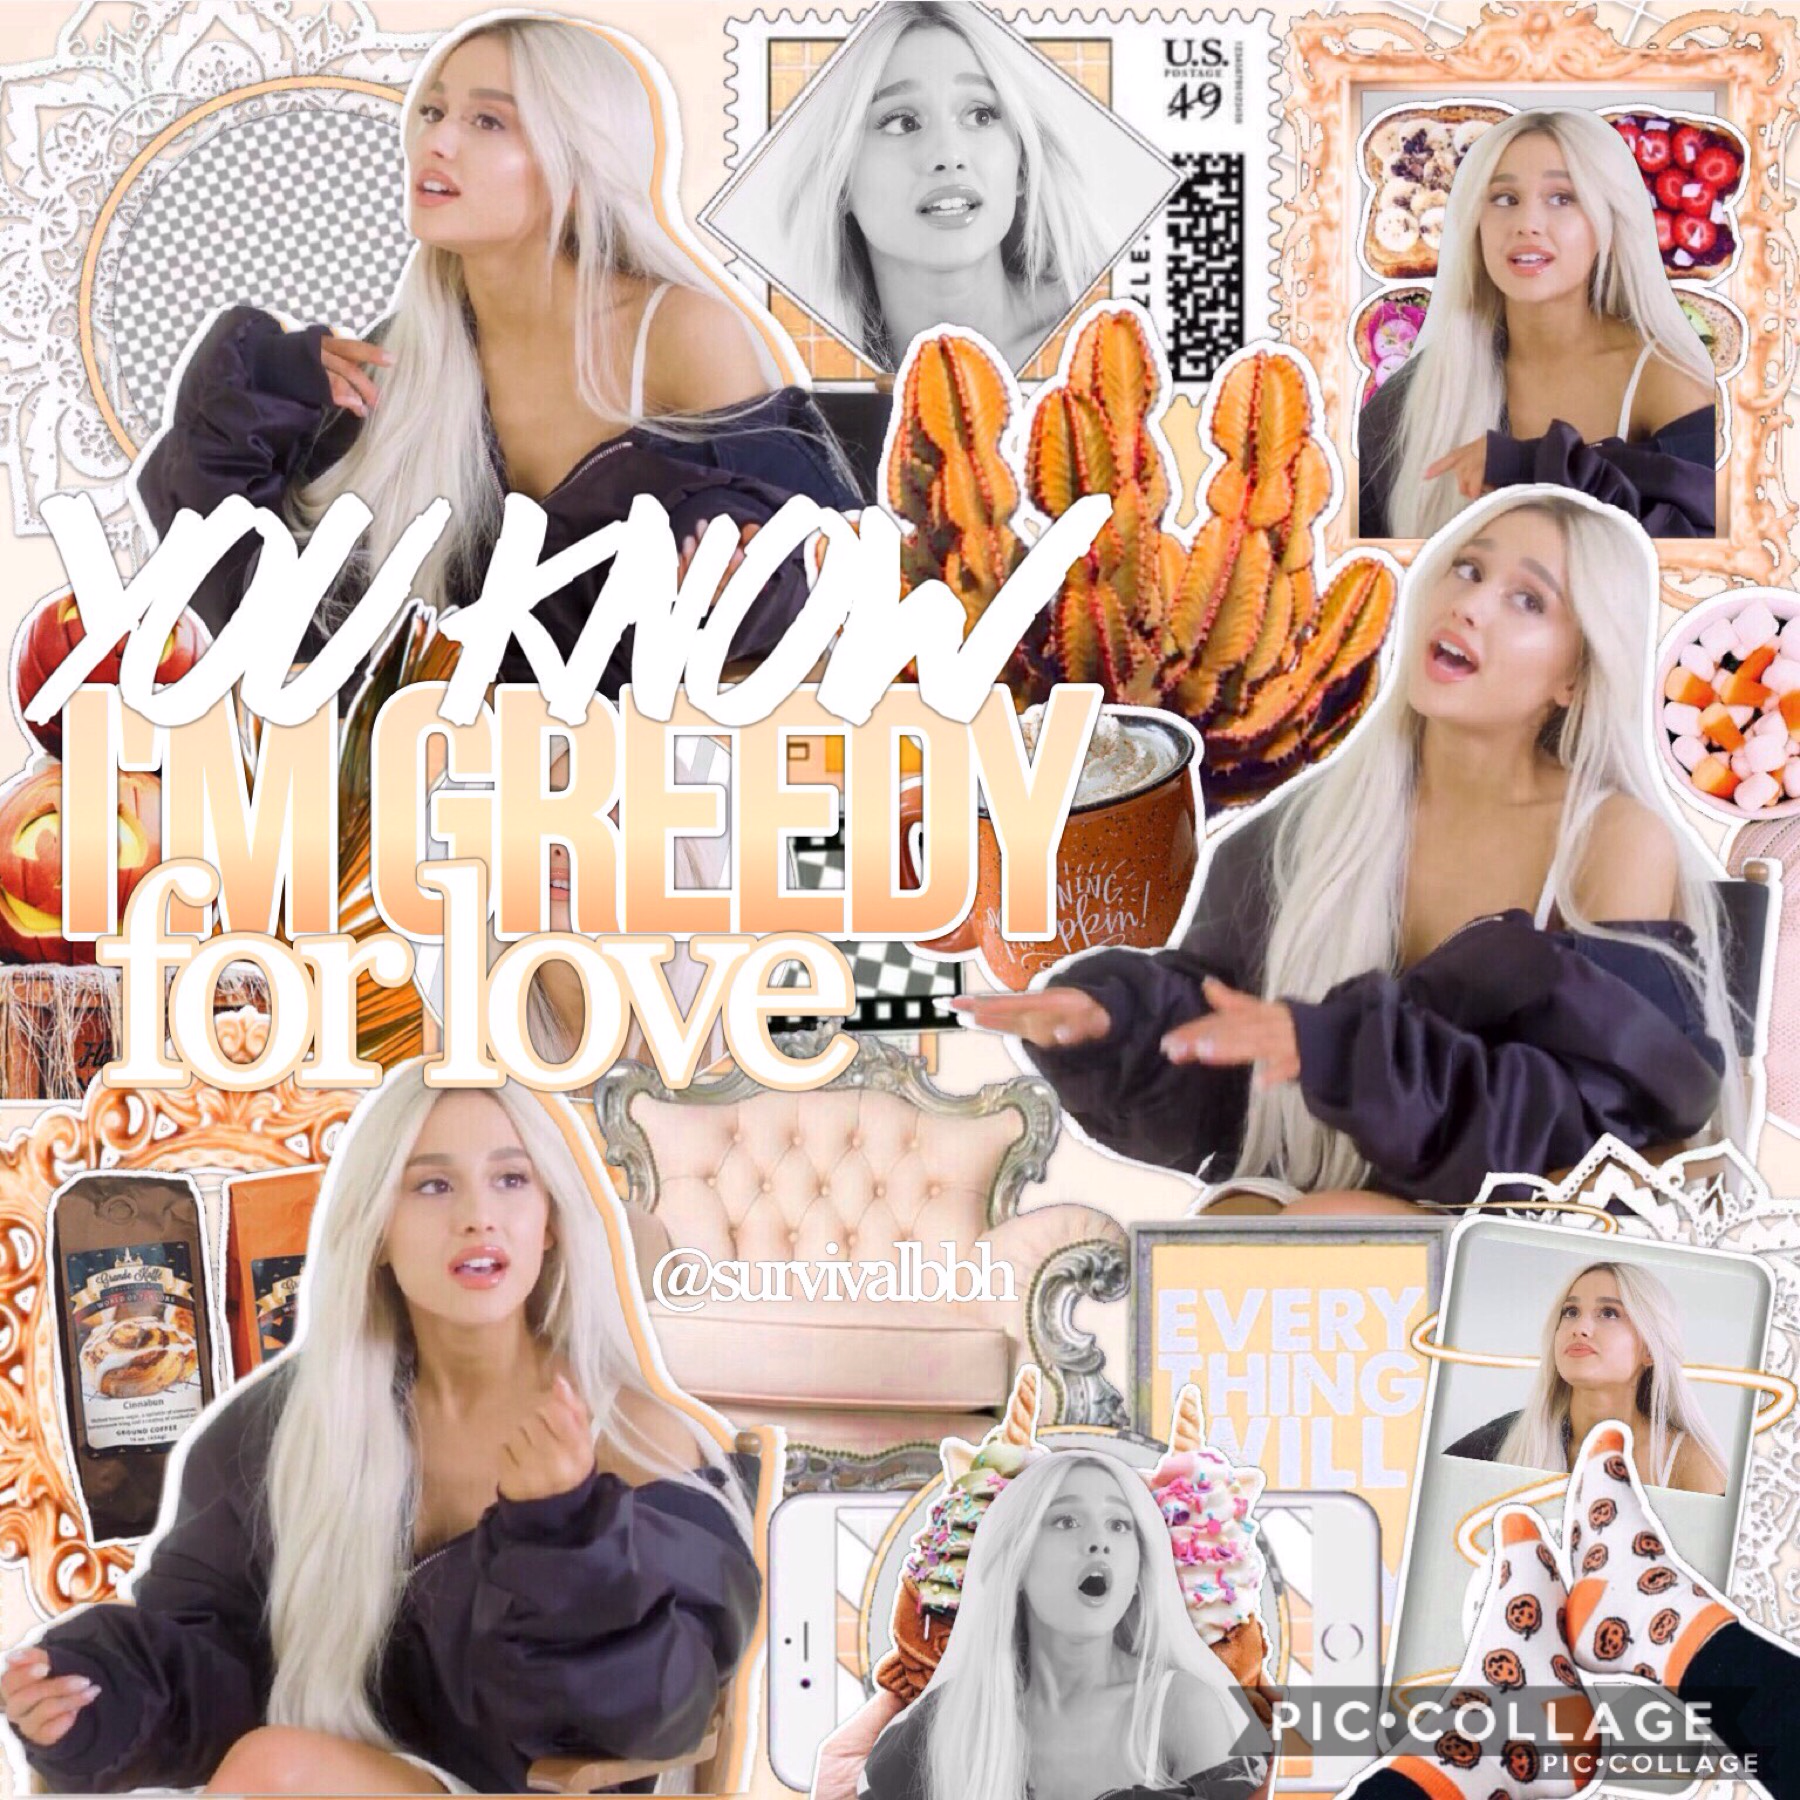 Just to let y'all know, it's fall guys NOT WINTER!!💛💛 anyways i hope you like this collage i made by myself after 3 months, and i'm so proud of it! ✨🙌🏼Let me know what you think in comments xx